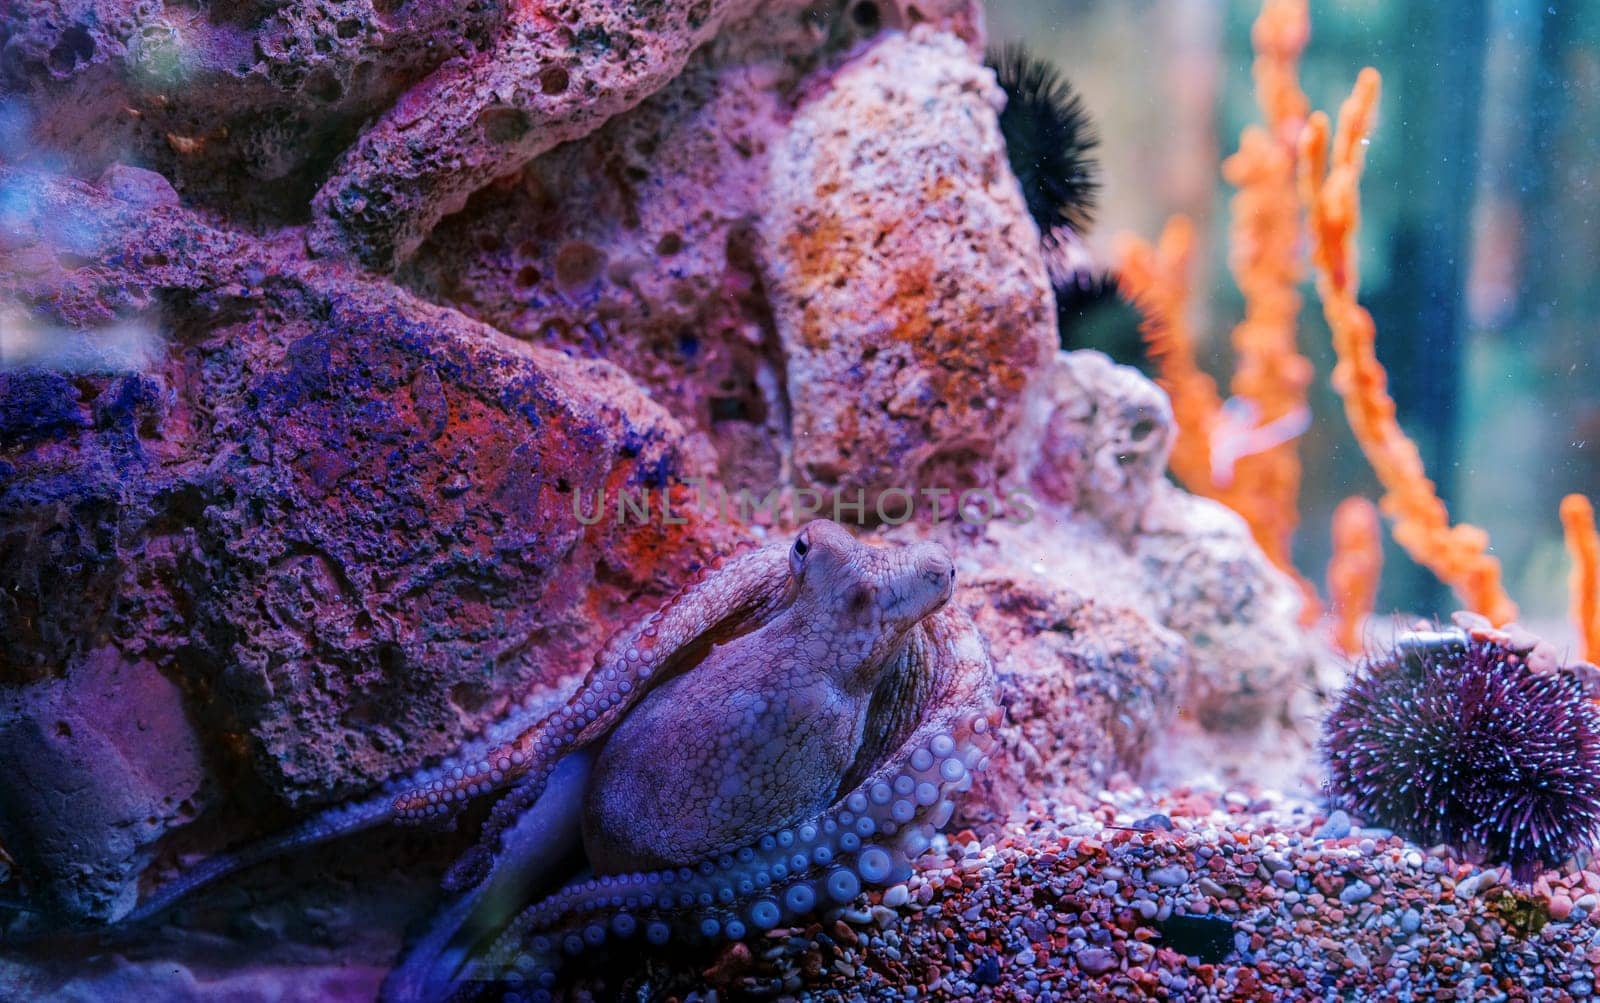 Octopus in a pink backlight camouflages itself near the rocks next to the sea urchins by Nadtochiy